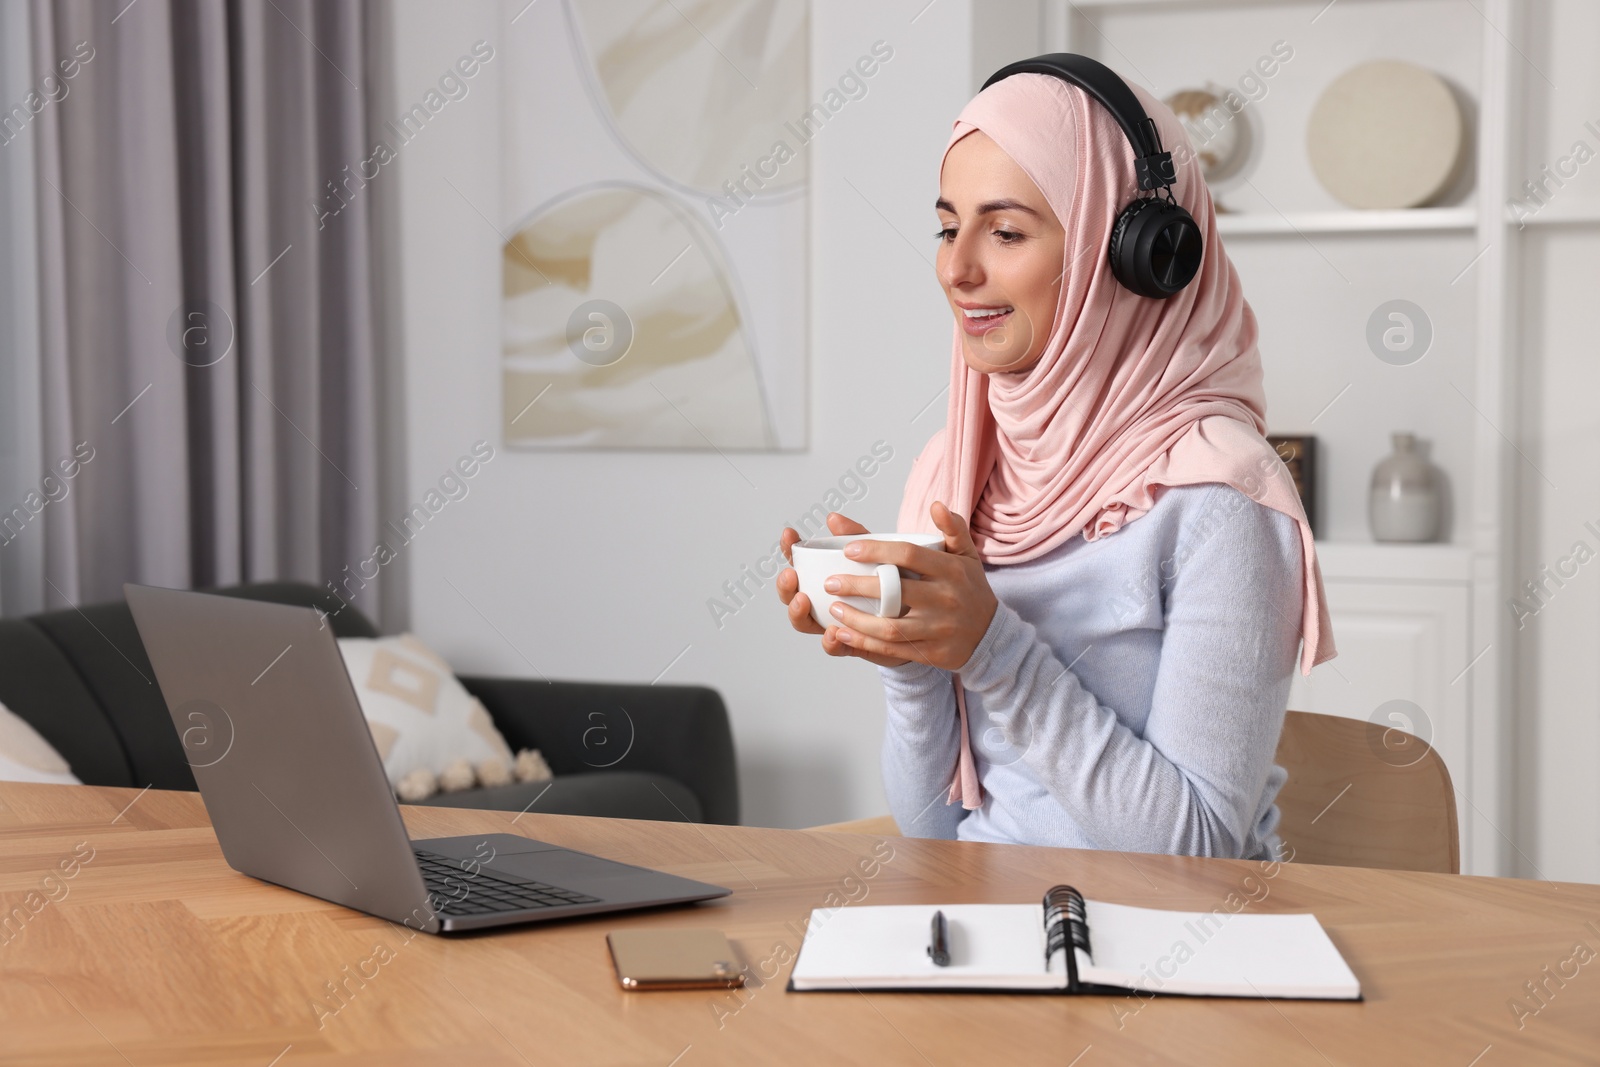 Photo of Muslim woman with cup of coffee using laptop at wooden table in room